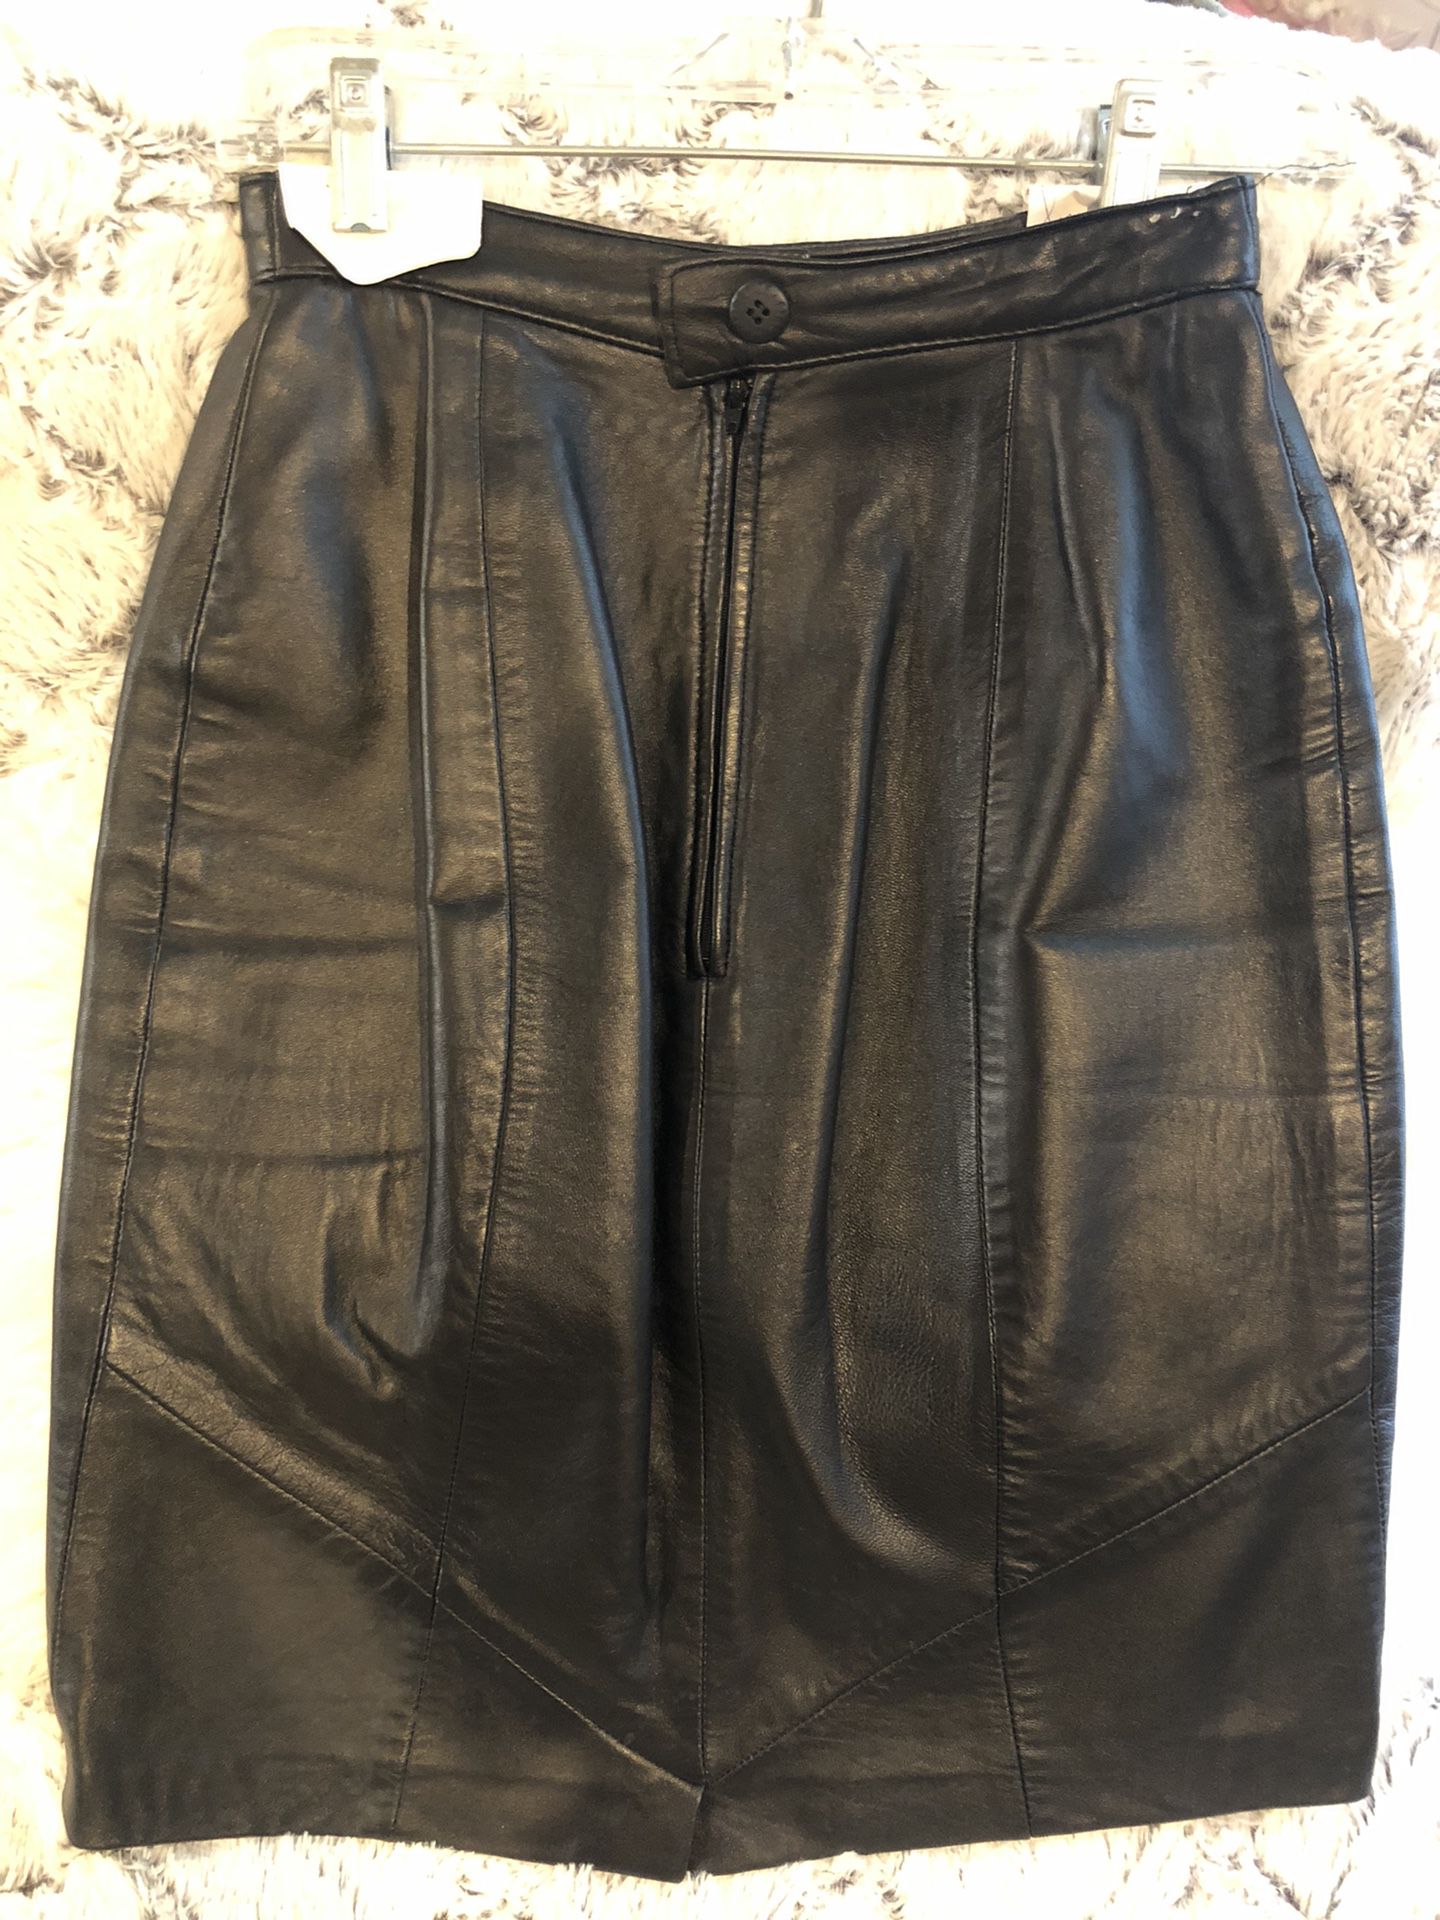 Real Leather Pencil Skirt